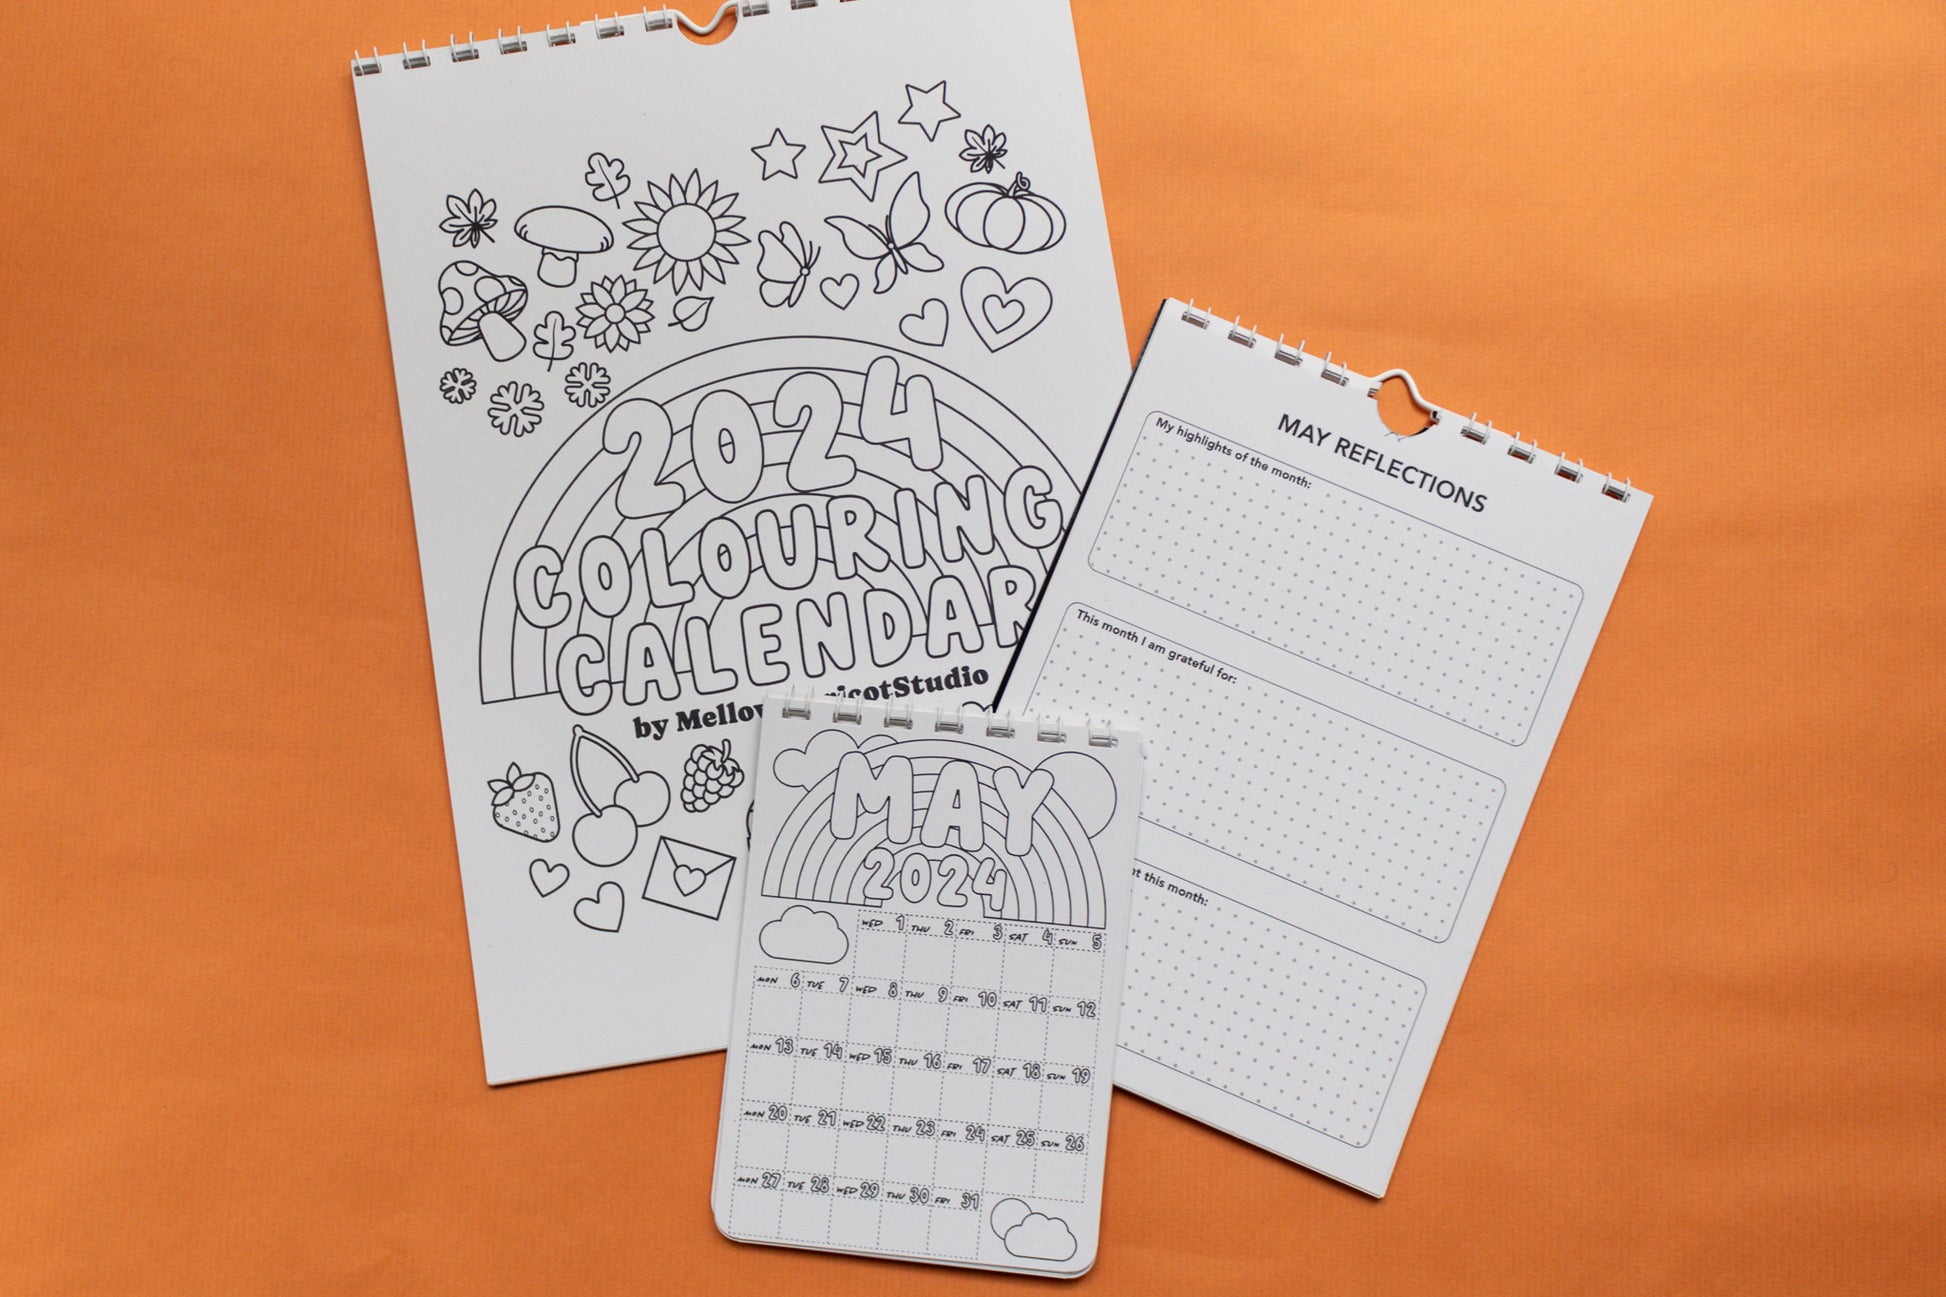 2024 Colouring Wall Calendar by Mellow Apricot Studio - cover, May page and May journal prompts